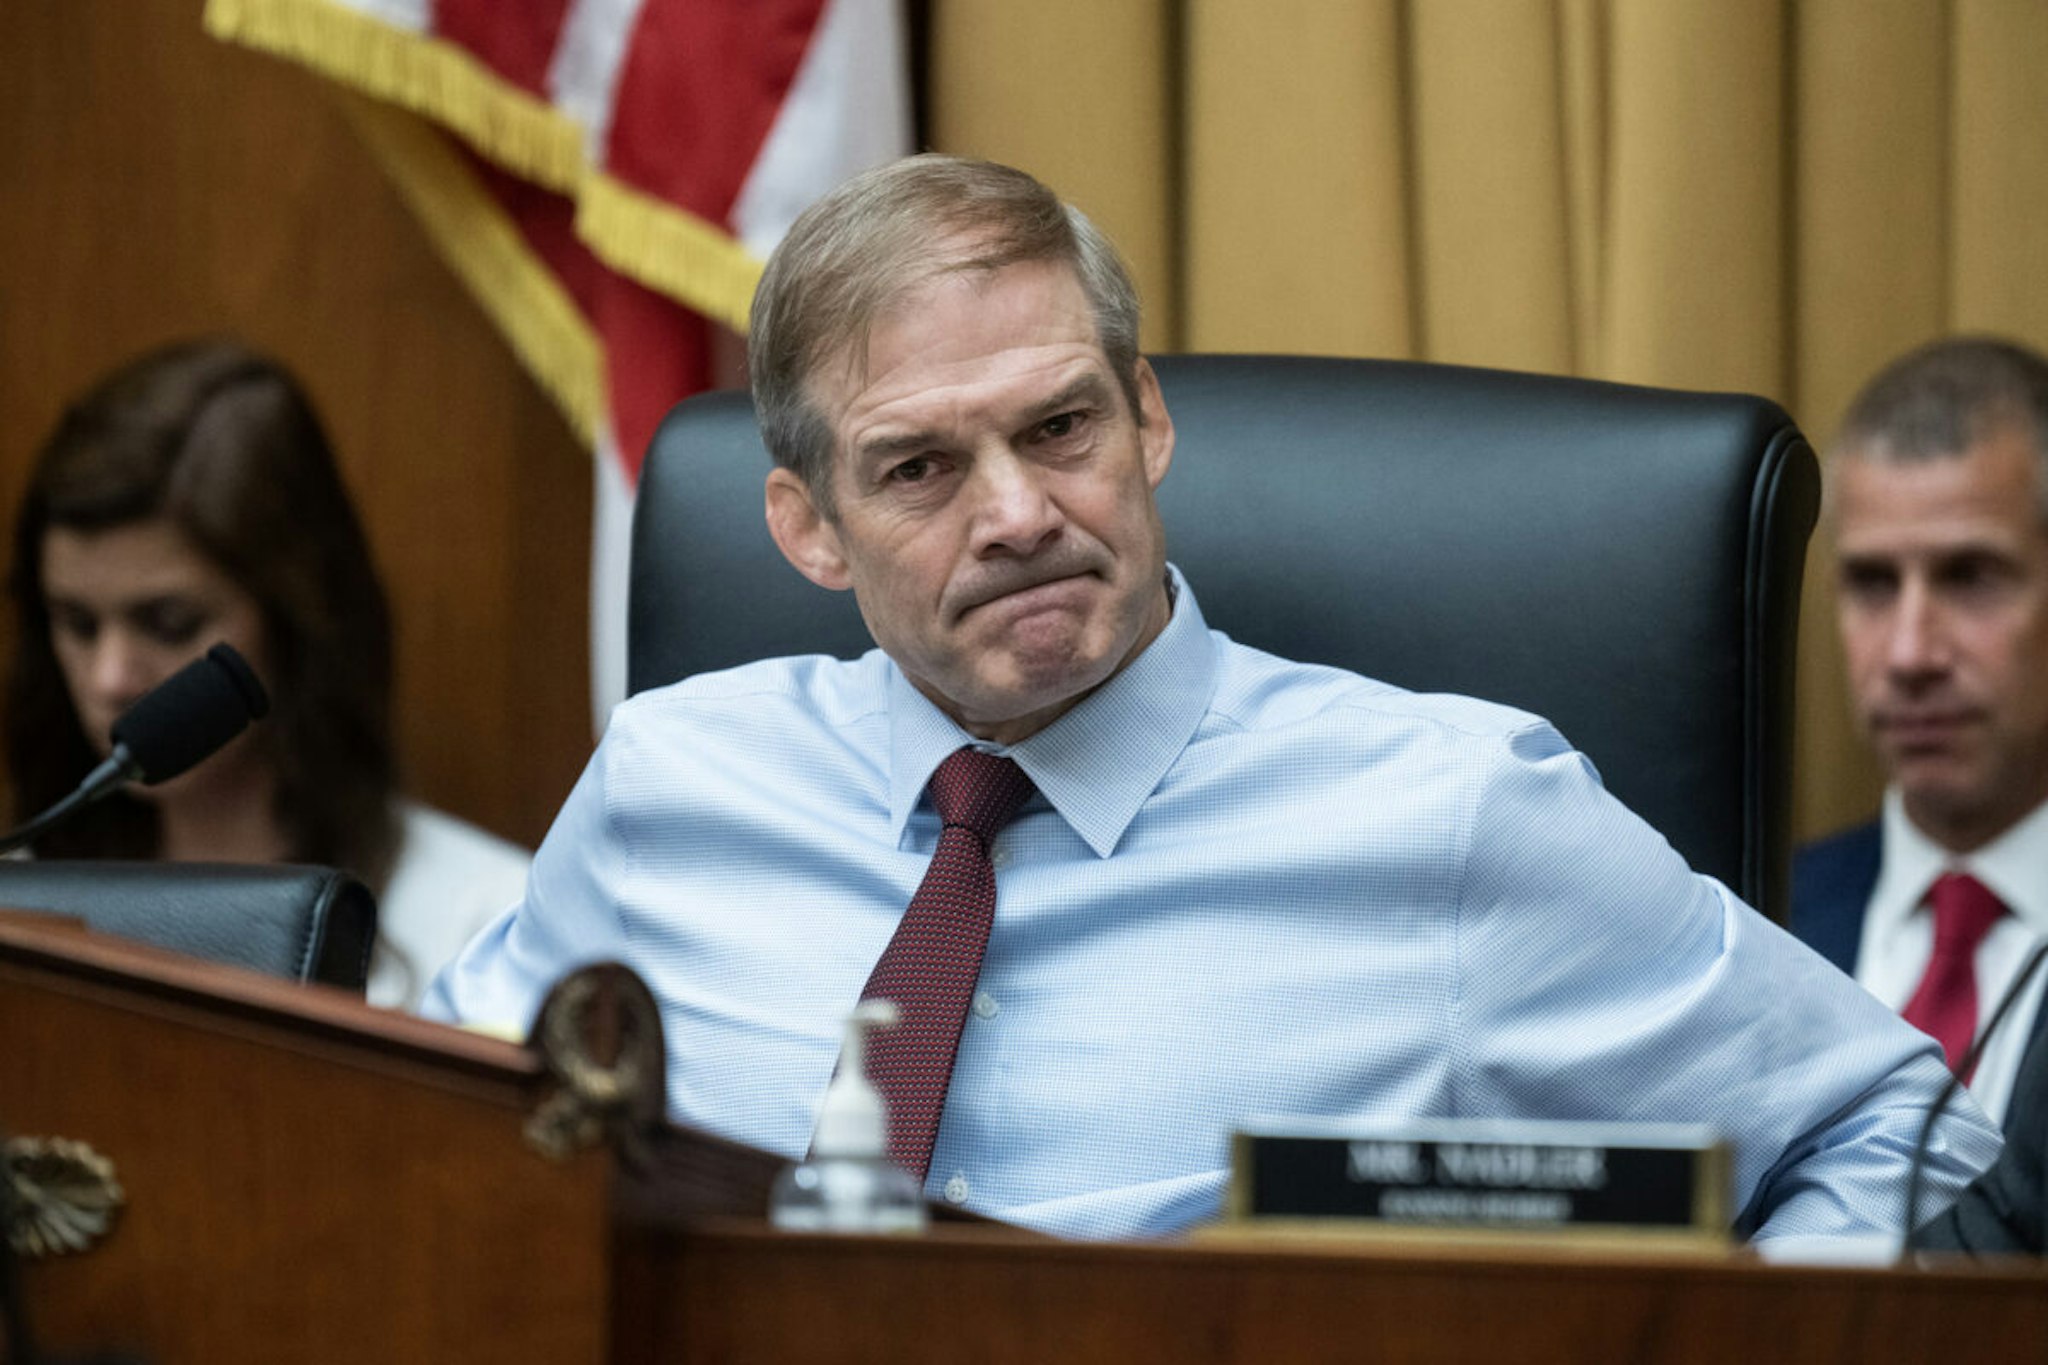 Chairman Jim Jordan, R-Ohio, conducts the House Judiciary Committee hearing on the "Report of Special Counsel John Durham," in Rayburn Building on Wednesday, June 21, 2023.